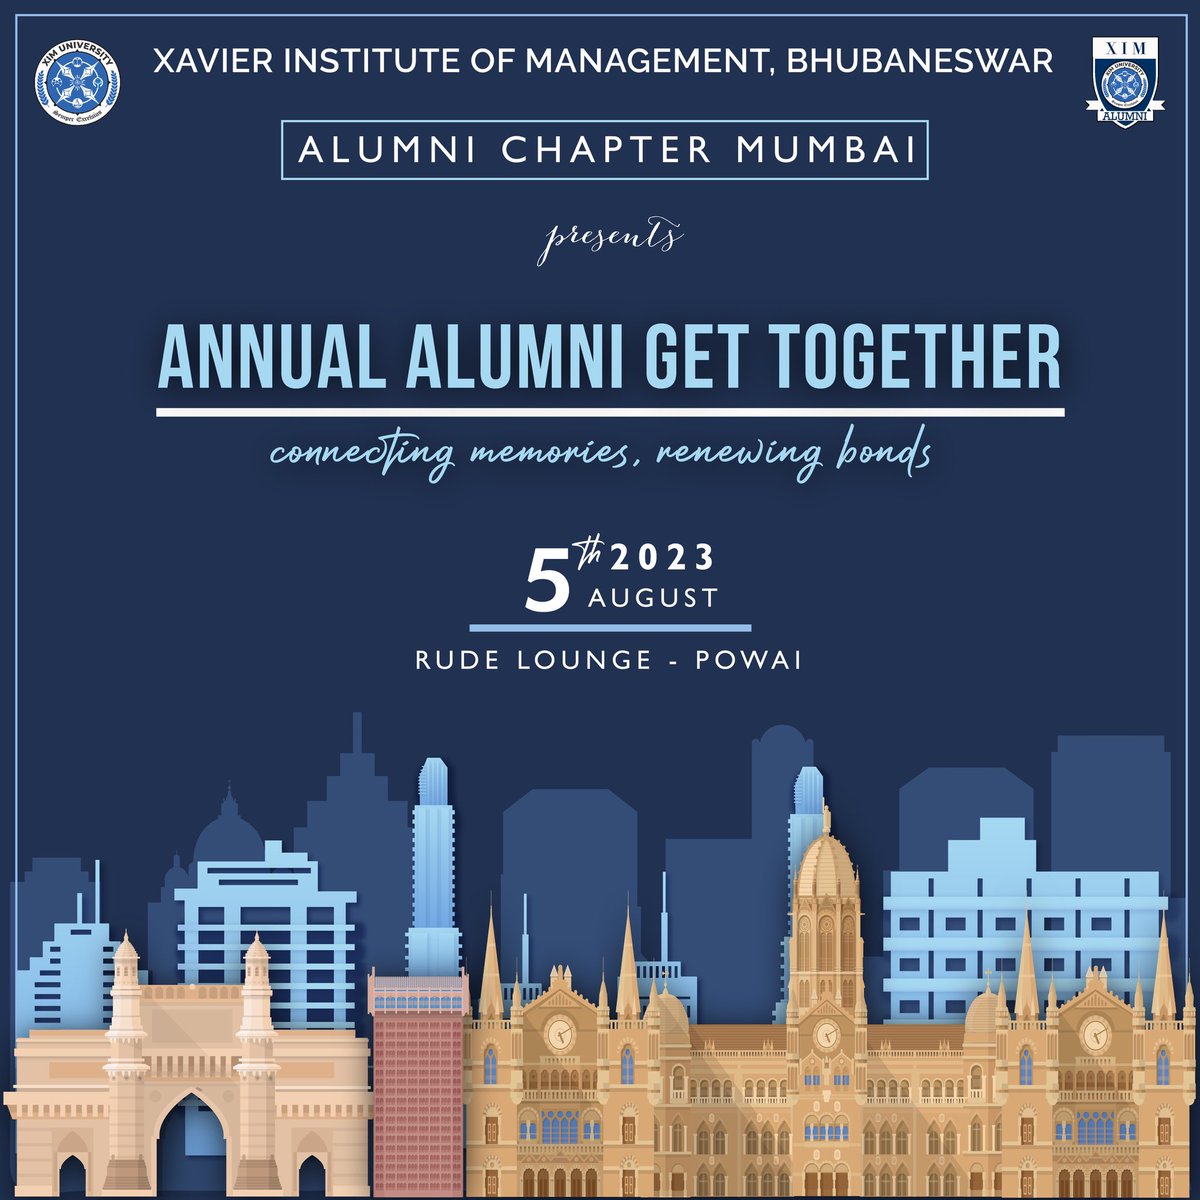 We are thrilled to announce the Annual Alumni Get-Together (G2G) organized by the Alumni Association, Mumbai Chapter.
 
Date: 5th August 2023
Venue: Rude Lounge, Powai
Time: 7:30 P.M onwards

Reach out to us for more details- +91 9078802150

#Mumbai
#AlumniEngagement 
#ximb